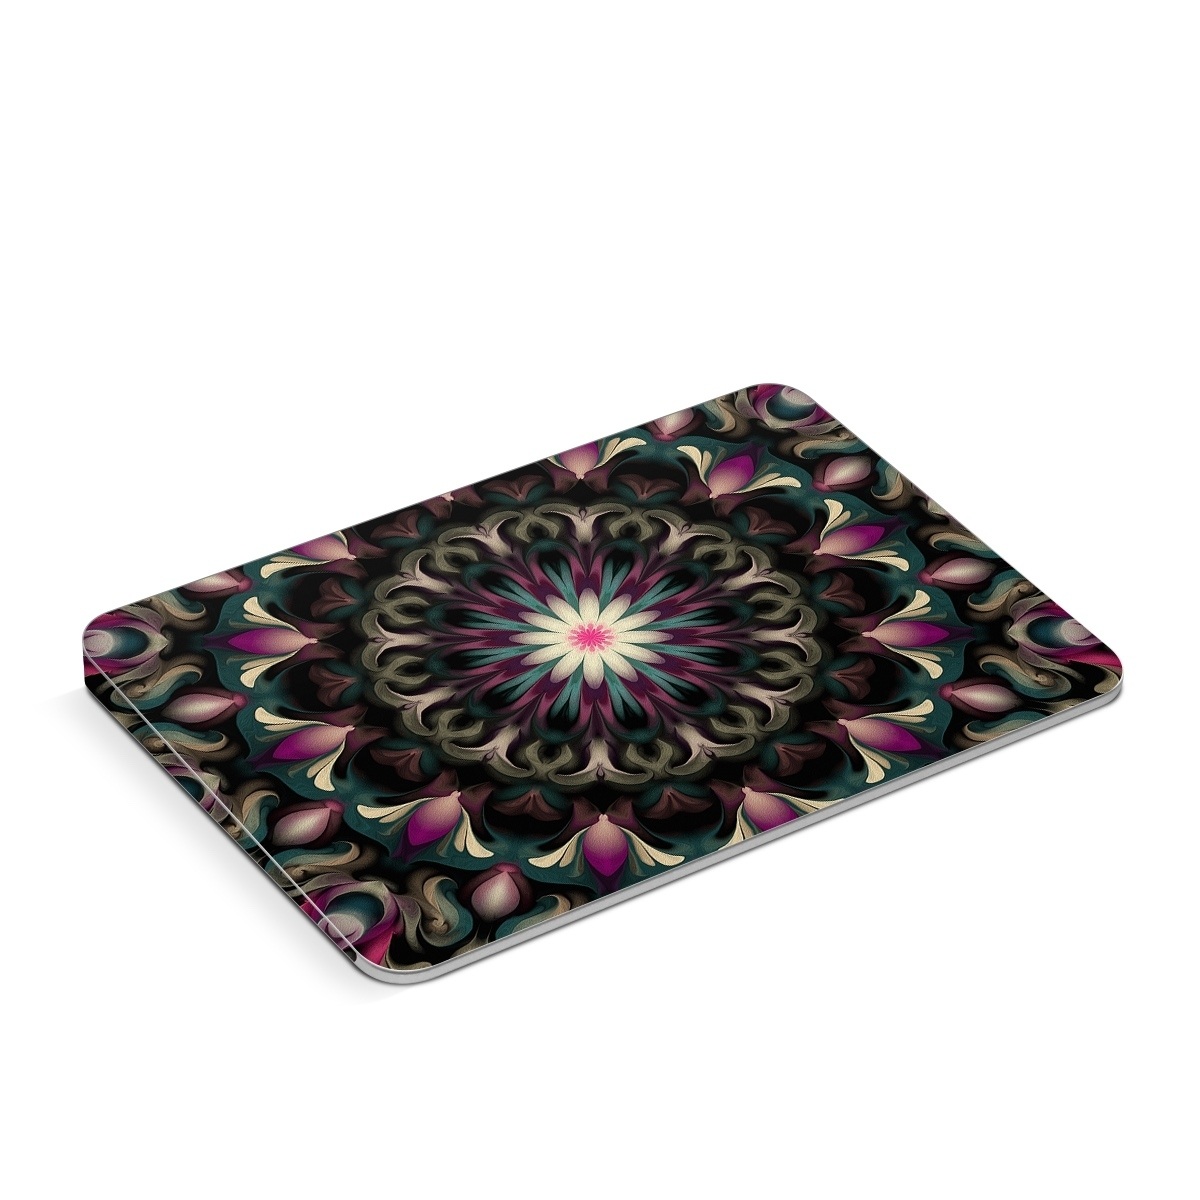 Apple Magic Trackpad Skin design of Fractal art, Pattern, Pink, Psychedelic art, Art, Kaleidoscope, Design, Symmetry, Visual arts, Textile, with black, purple, white, green, blue colors